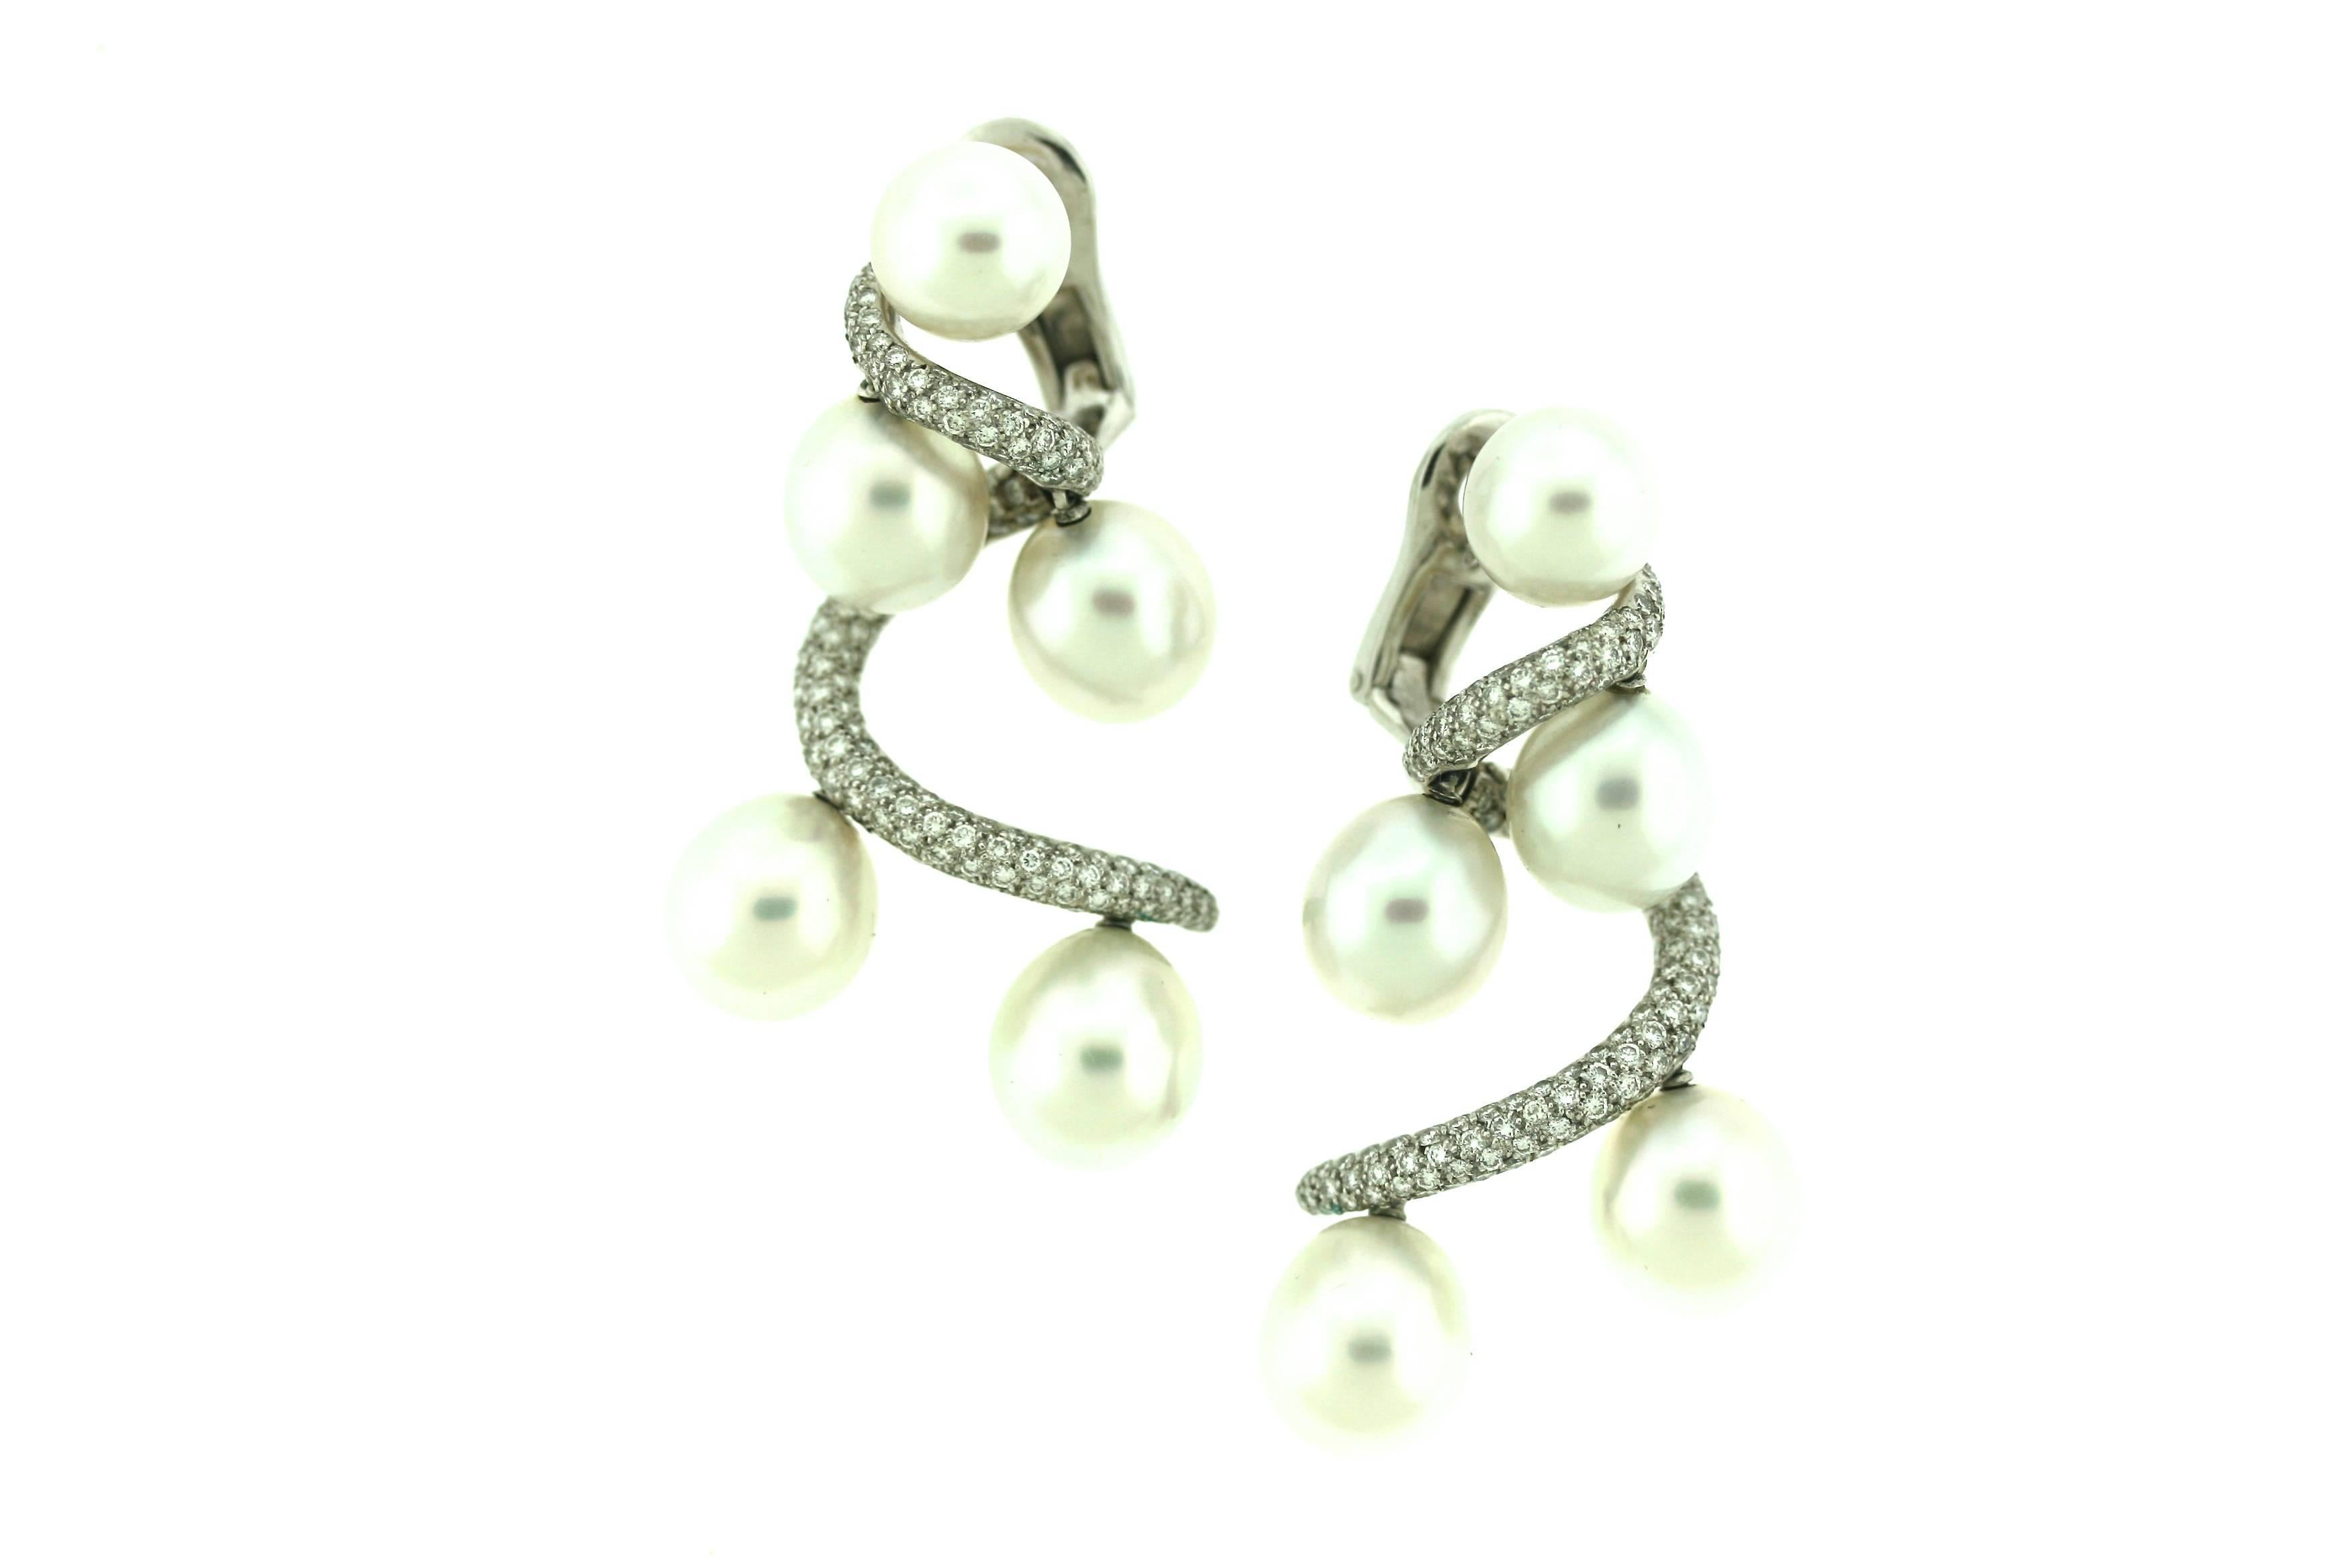 Chanel 18k white gold ear clips designed as a diamond pave-set cascading helix suspending dangling South Sea pearls. These spectacular earrings were created in 1997 to commemorate the opening of the Chanel Boutique on the famed Place Vendome in